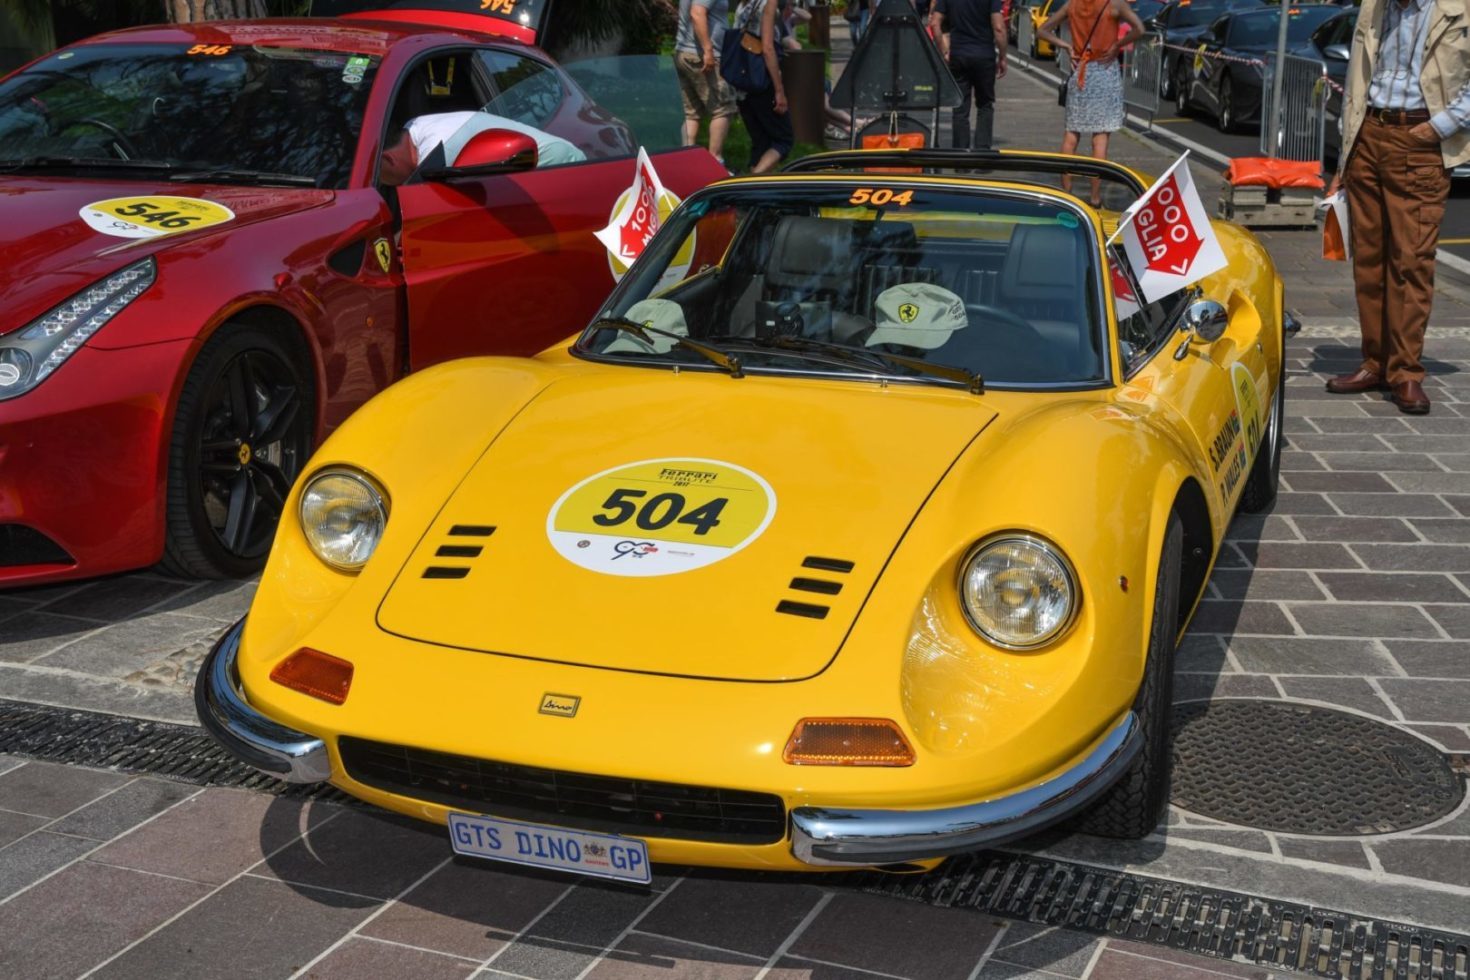 1000 Miglia: the famous historical re-enactment of vintage cars on the streets of the Motor Valley